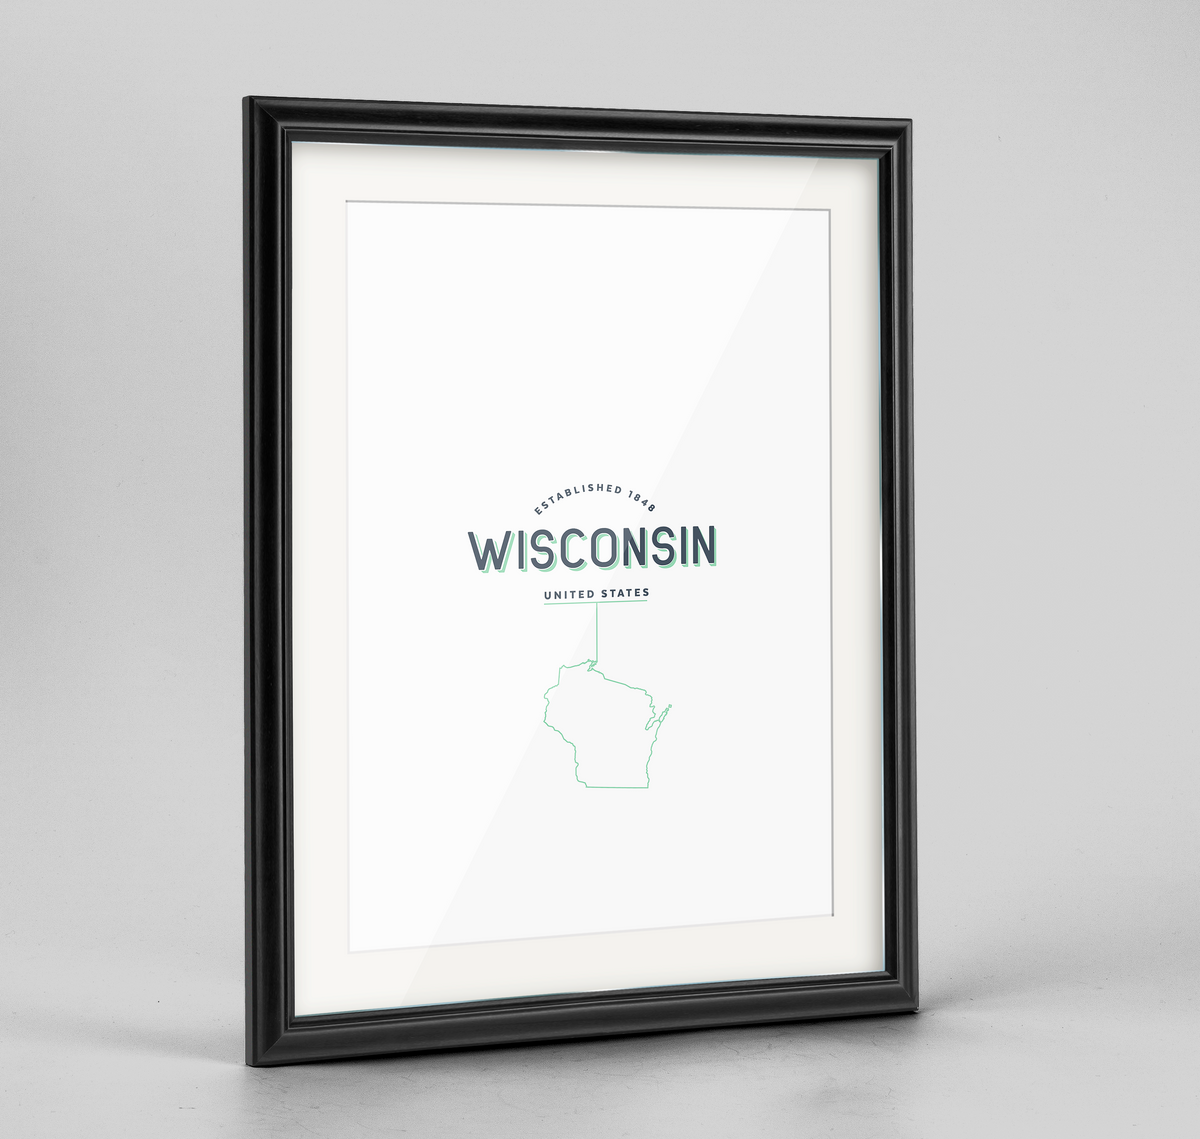 Wisconsin Word Art Frame Print - State Line